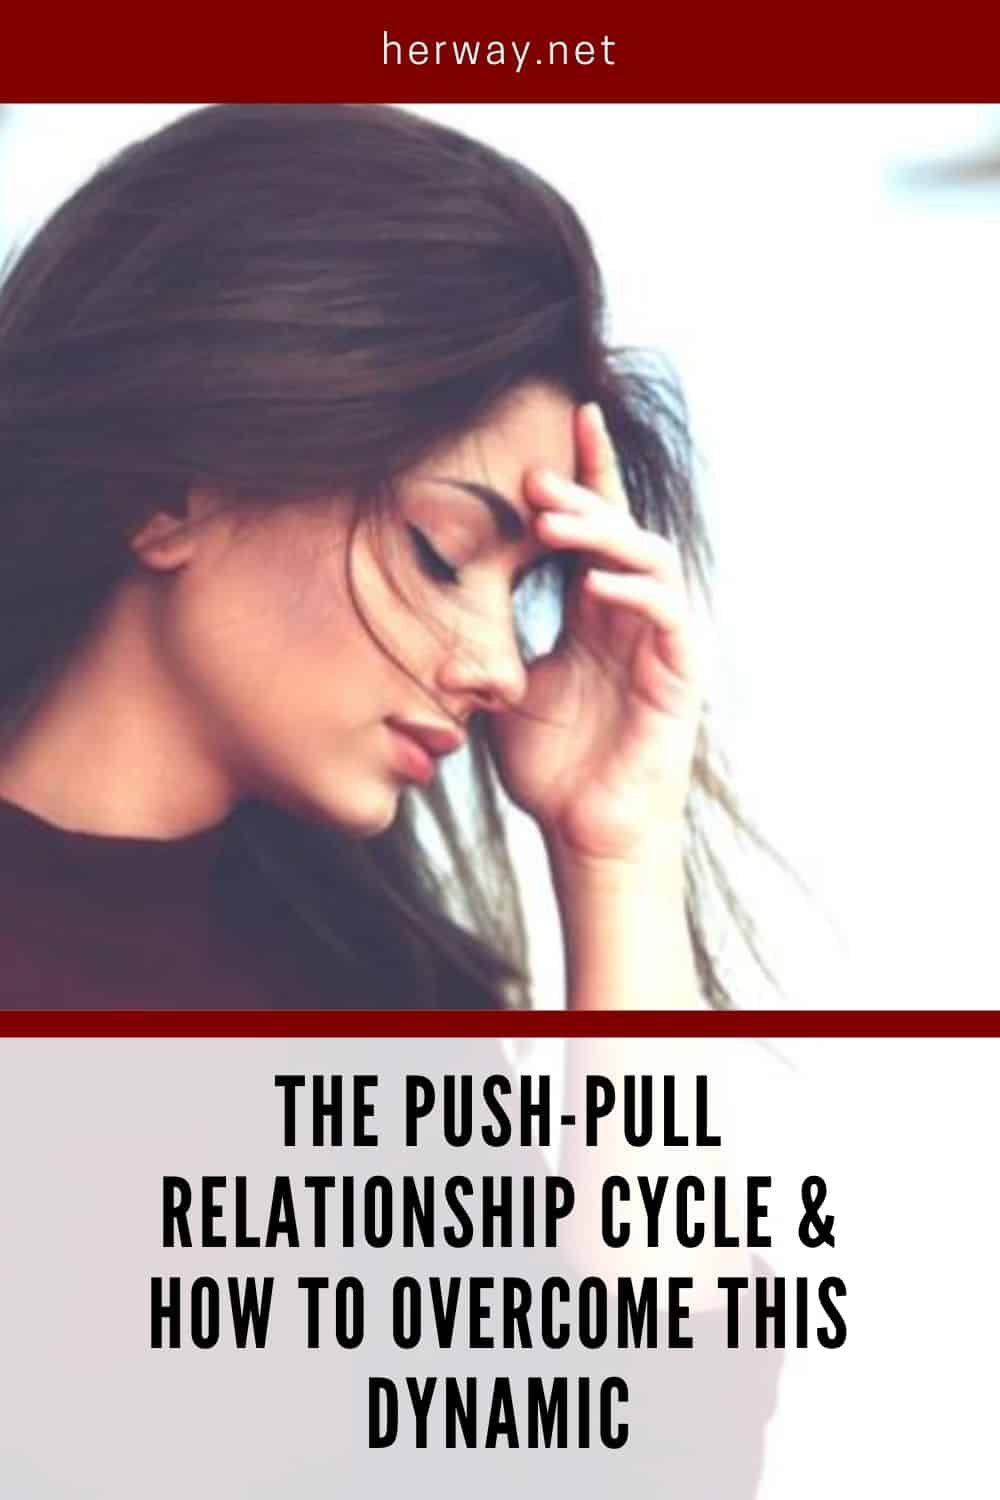 The Push-Pull Relationship Cycle & How To Overcome This Dynamic